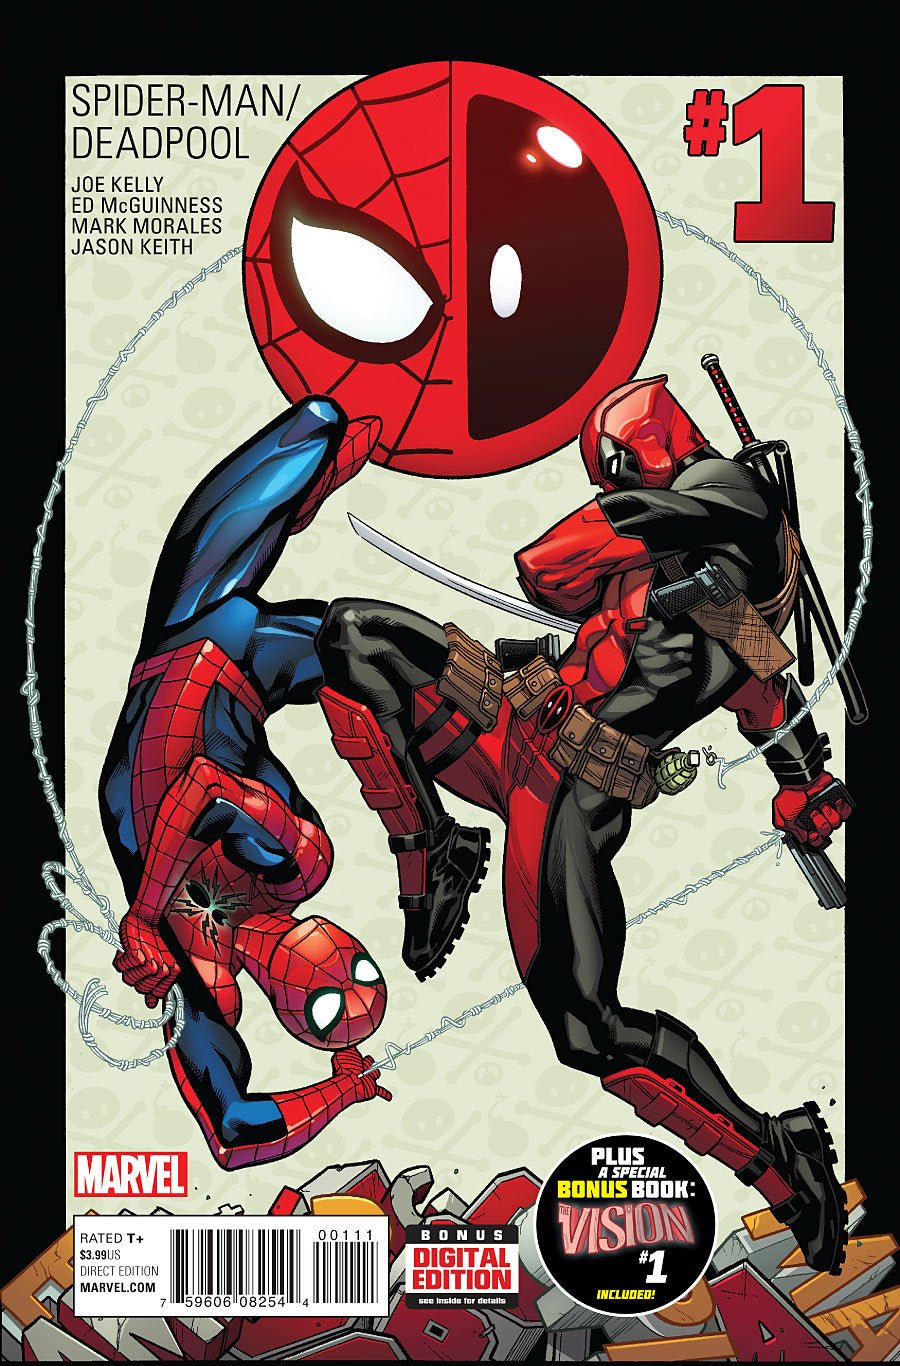 SPIDER-MAN DEADPOOL #1 to #50 (OF 50) | Game Master's Emporium (The New GME)